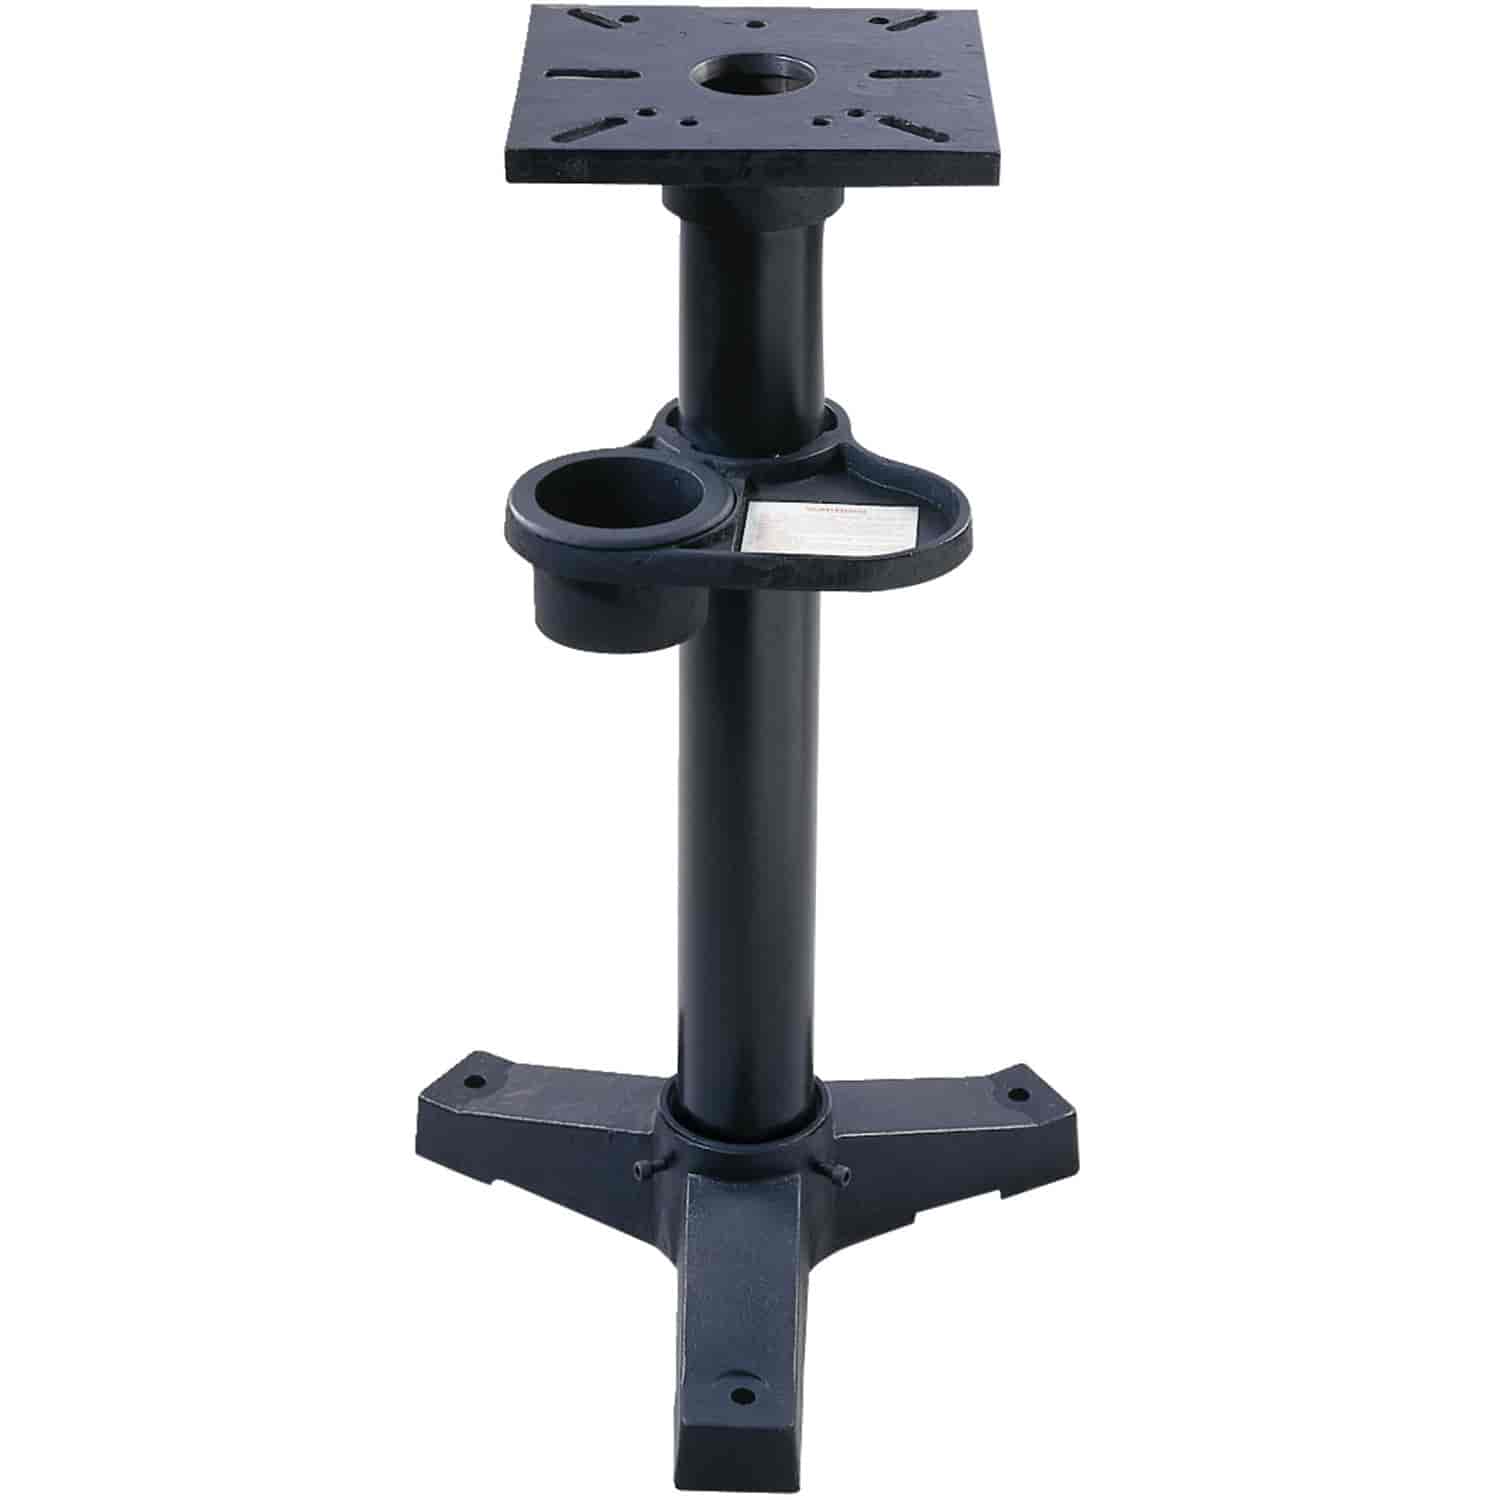 Pedestal Stand for Bench Grinders Overall Dimensions (LxWxH): 31"x21"x5"